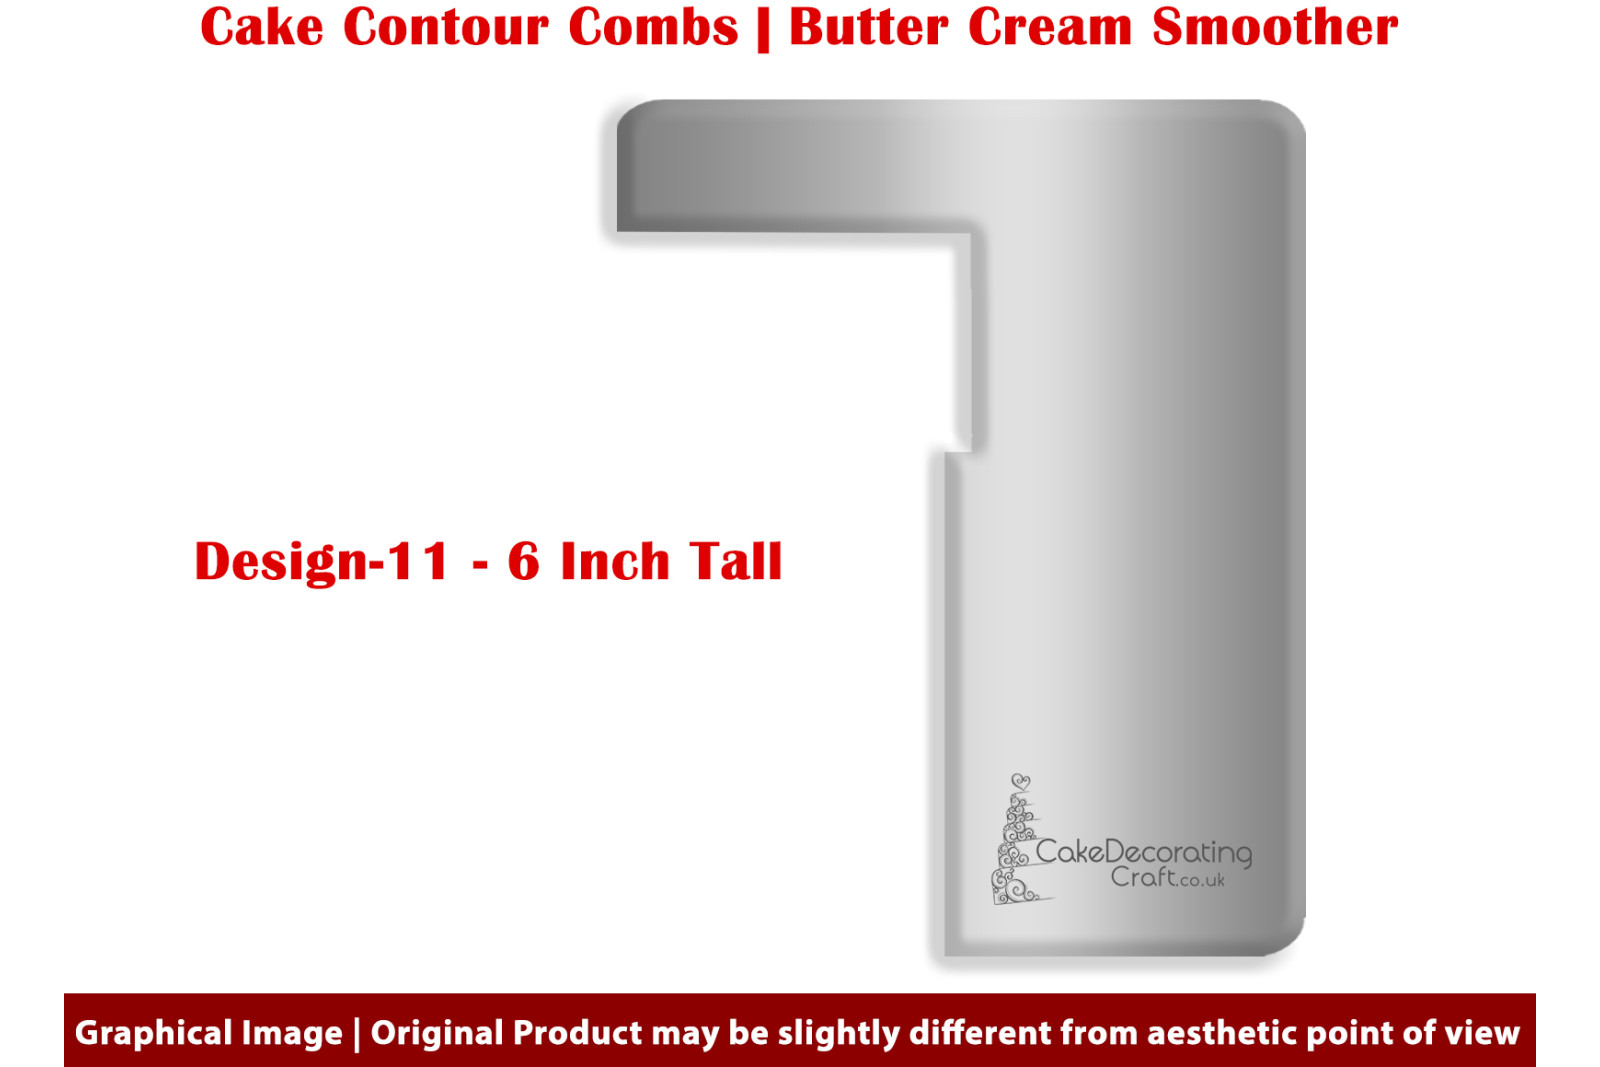 Gift Box | Design 11 | 6 Inch | Cake Decorating Craft | Cake Contour Combs | Smoothing | Metal Spreader | Butter Cream Smoothing | Genius Tool